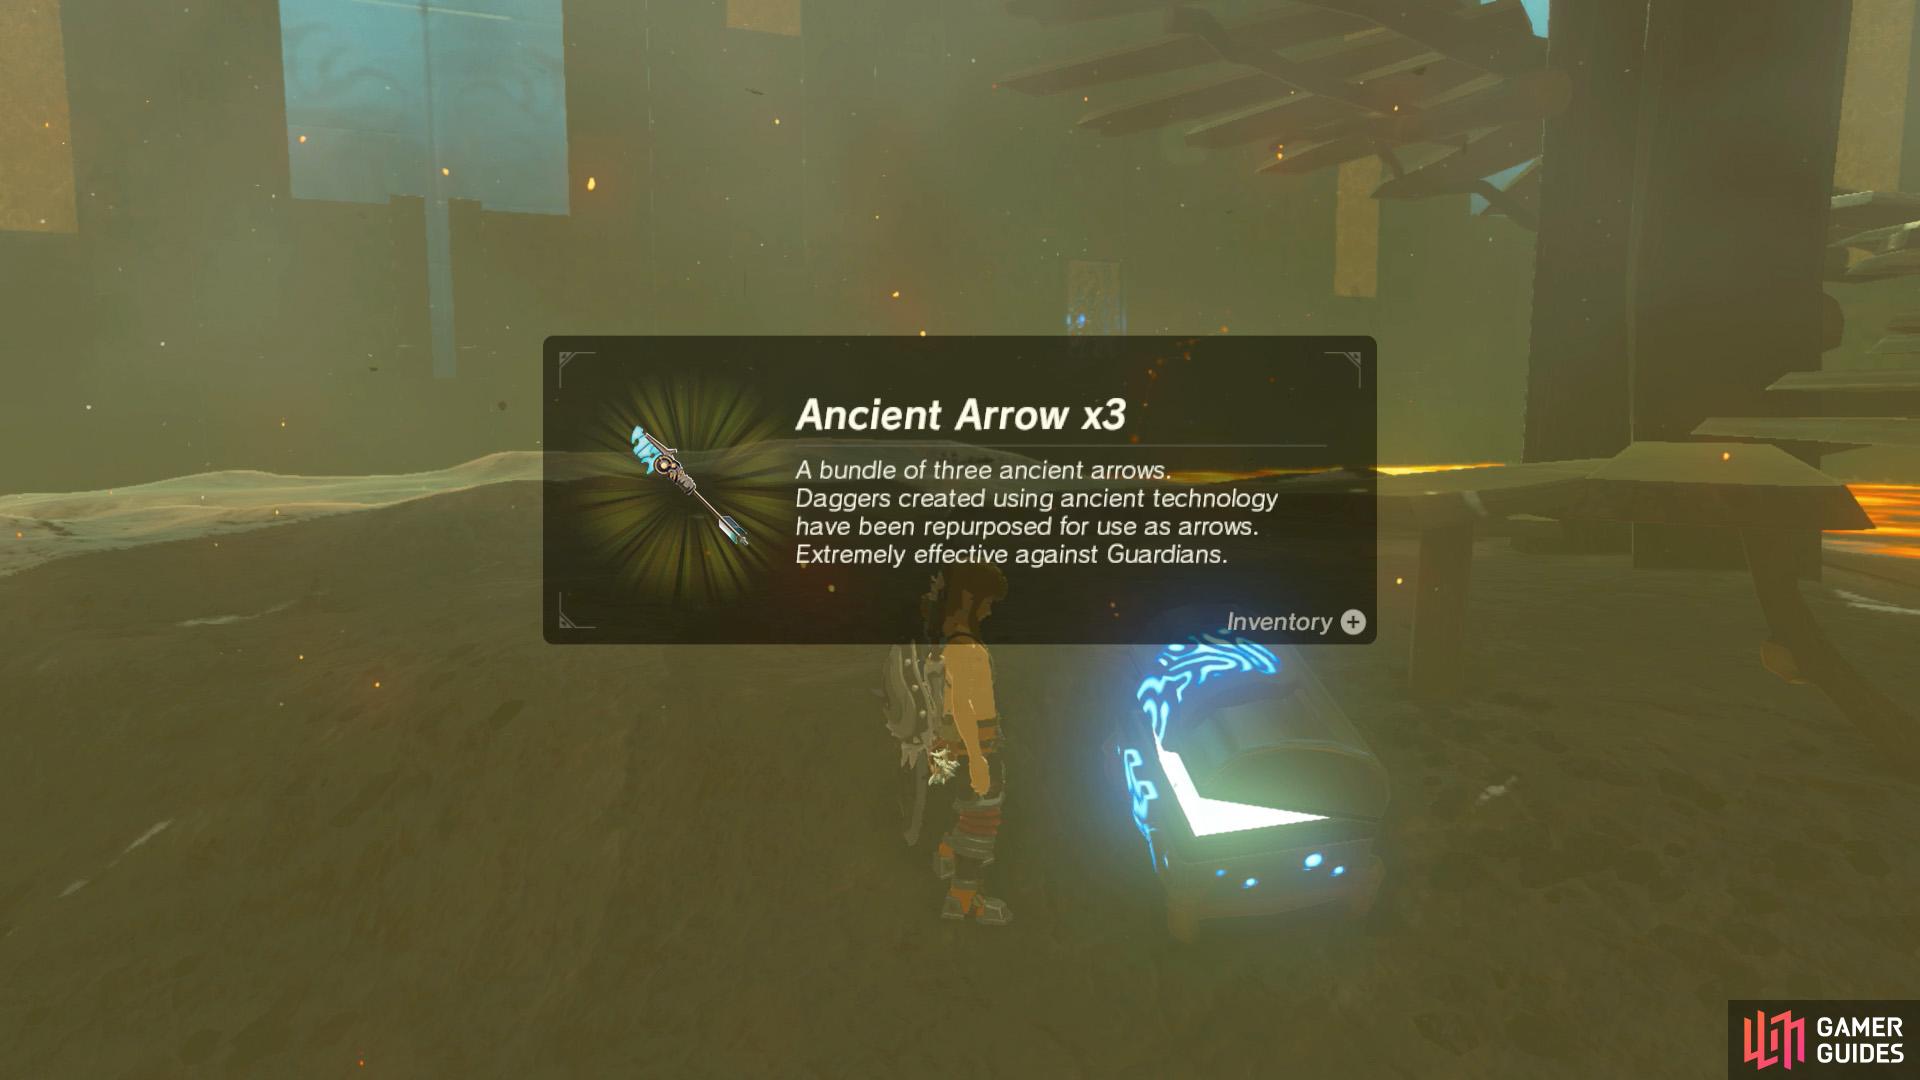 Your reward is another 3 Ancient Arrows!